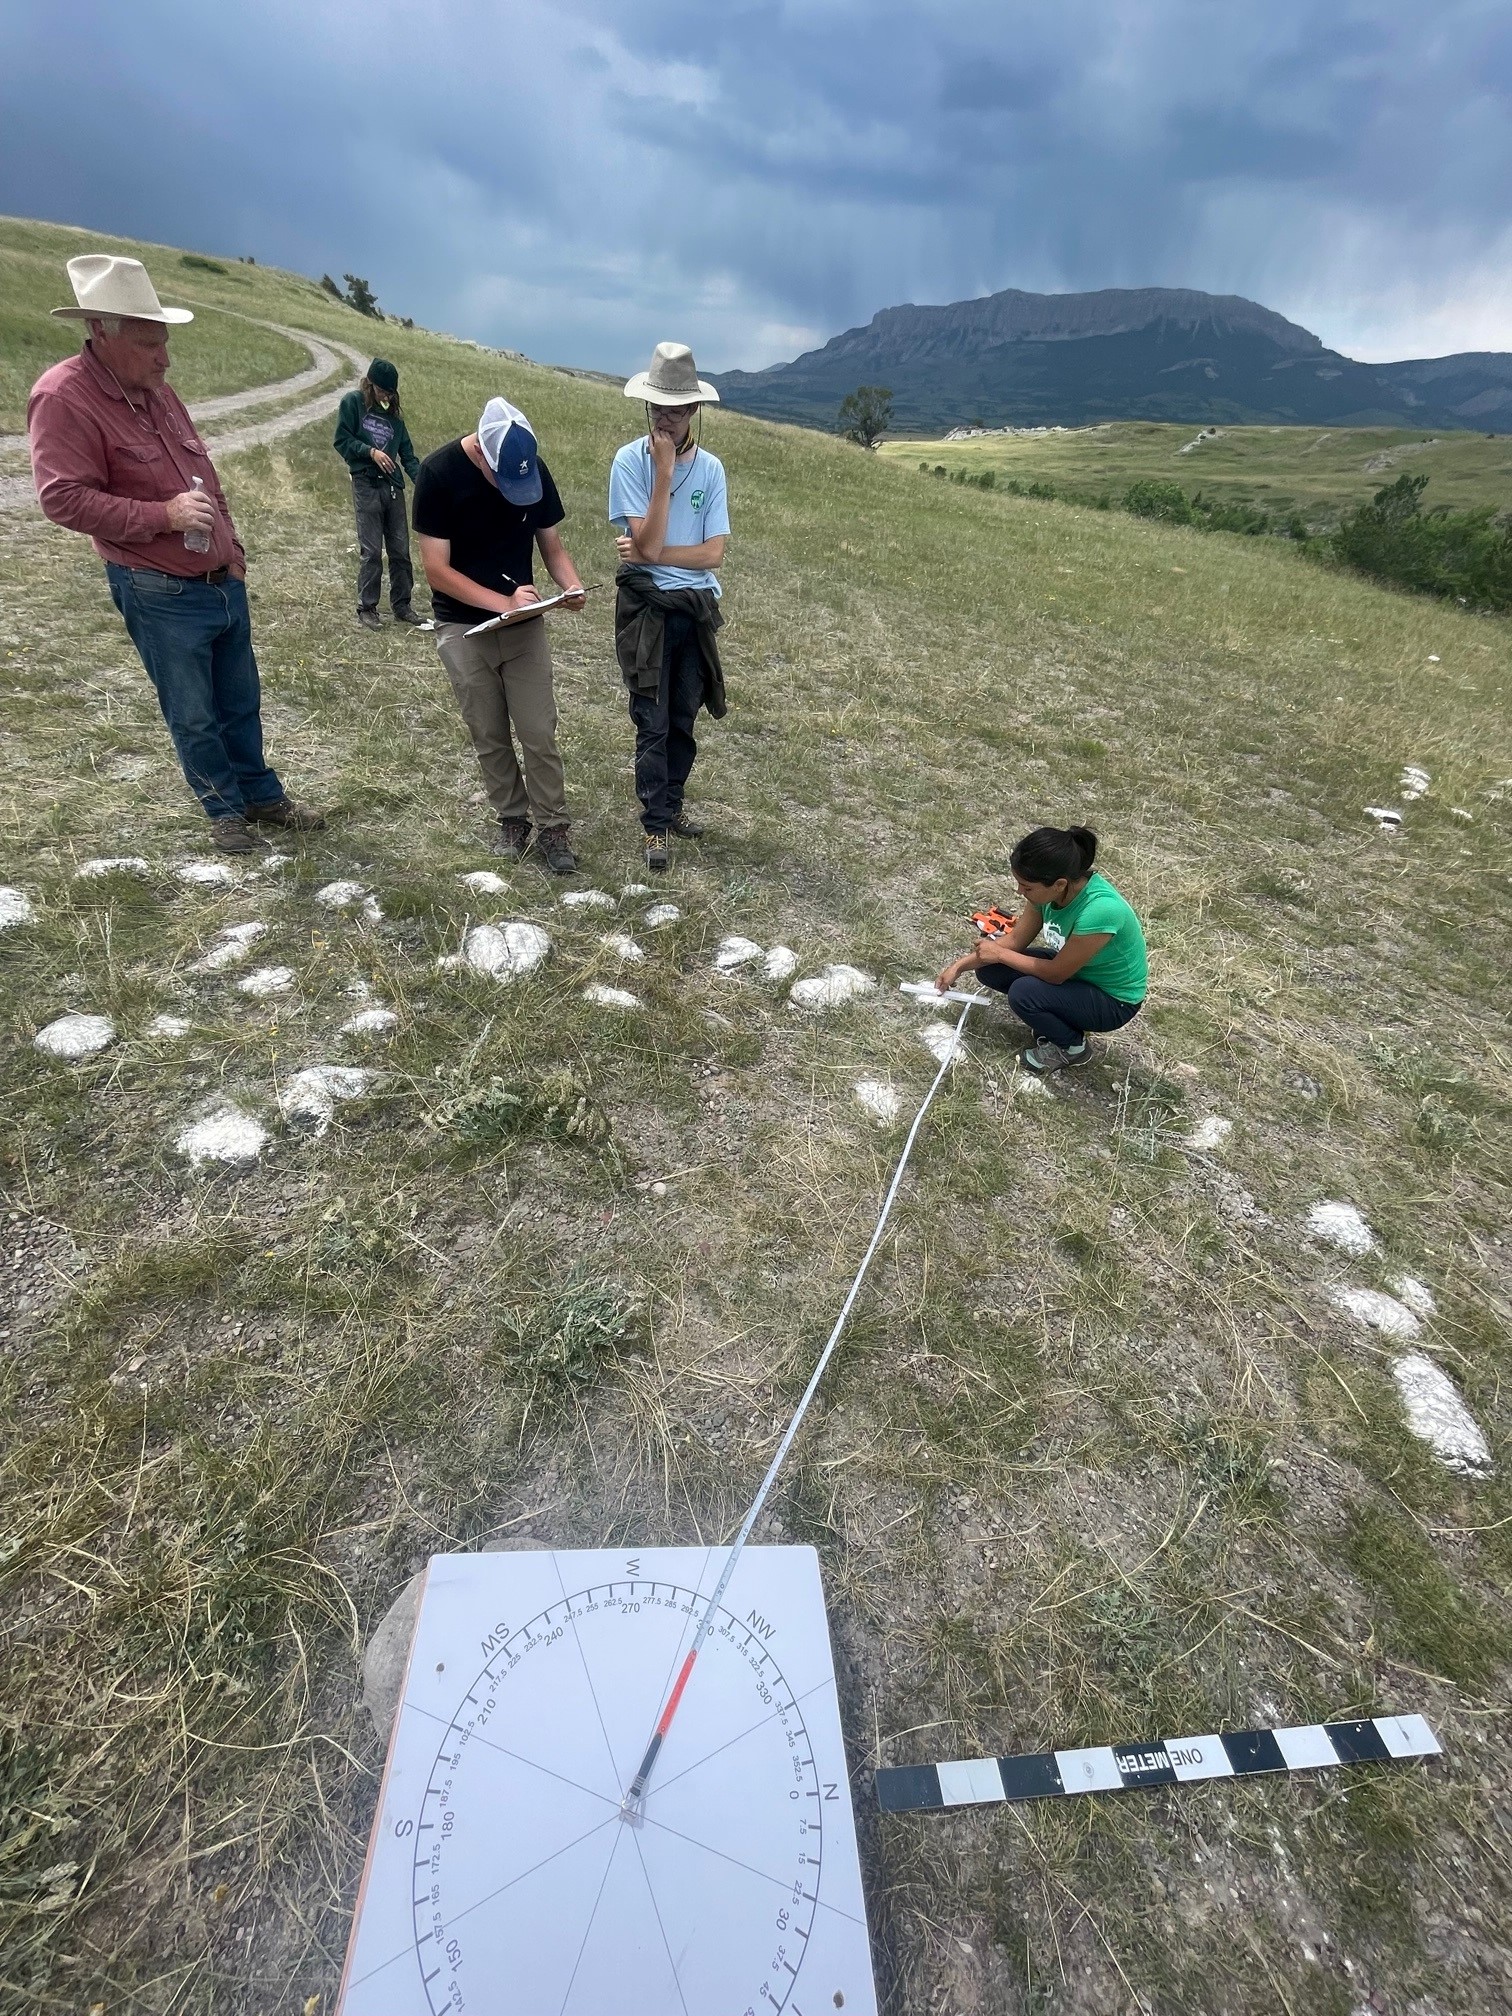 A photo of a group of people outdoors. One person is sitting on the ground, a measuring tape and other tools.